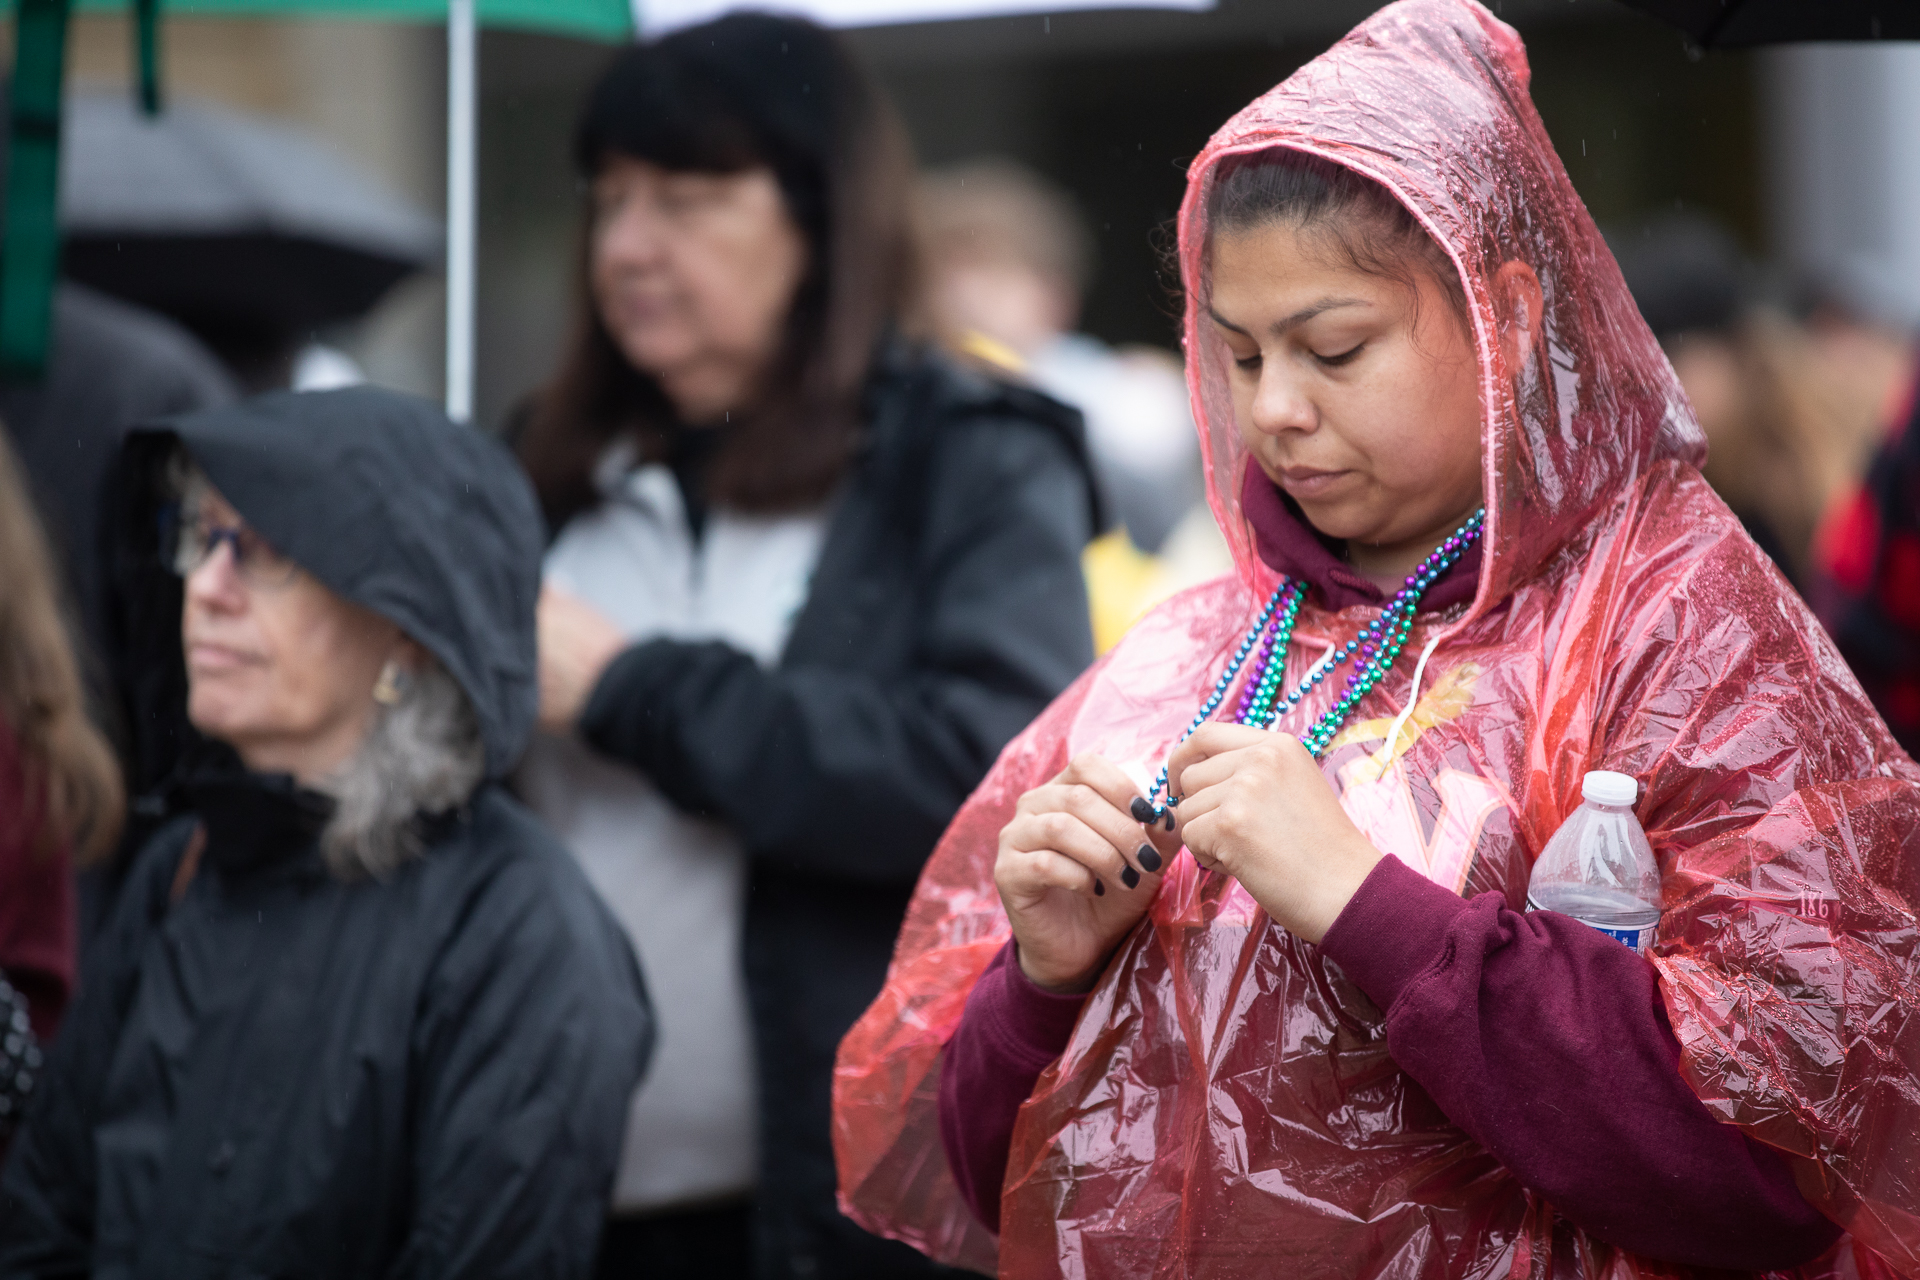 A woman wearing a poncho holds and looks down at necklaces made of blue, green and purple beads